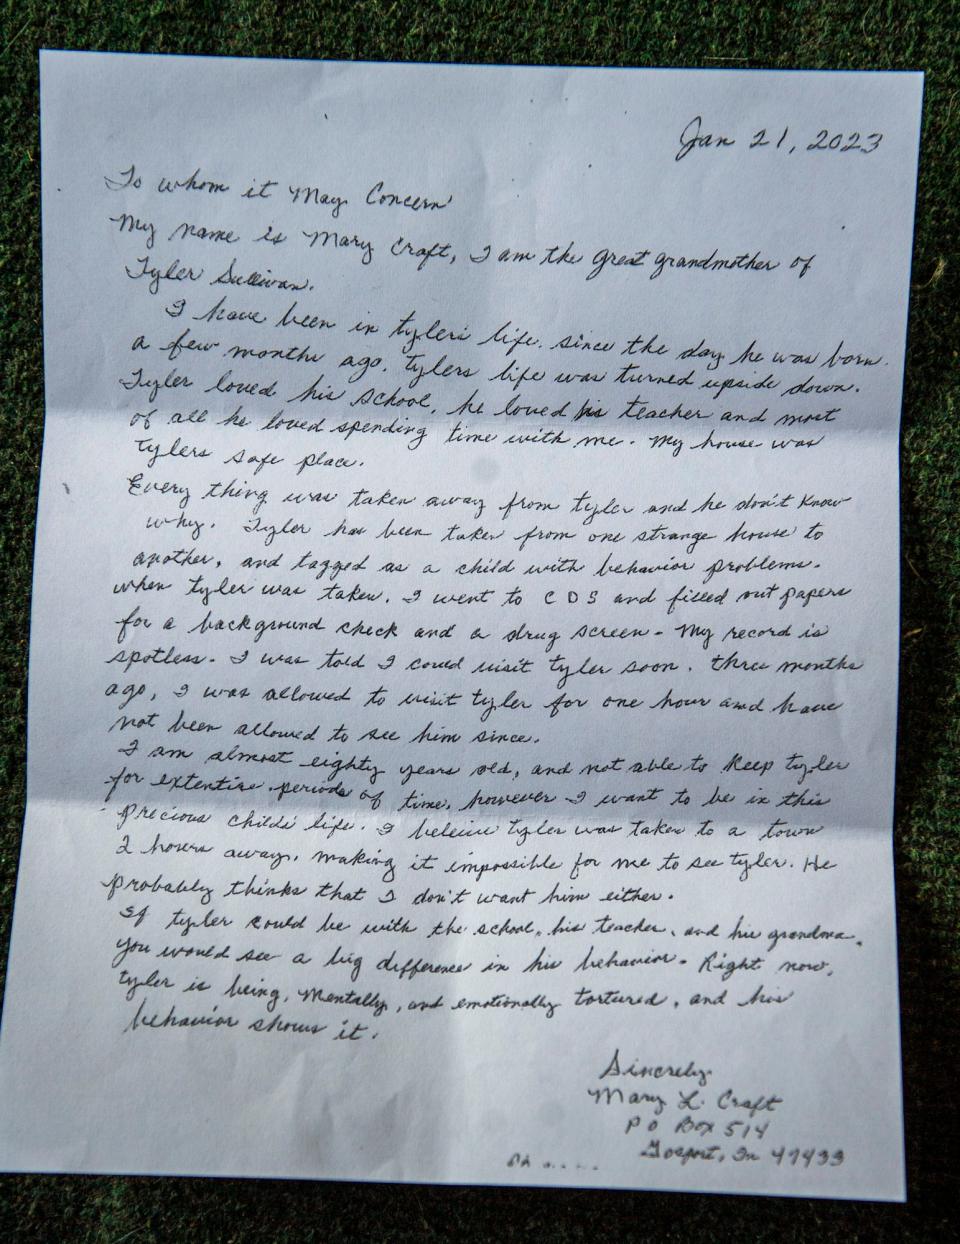 Mary Craft has written letters asking to be able to see Tyler.